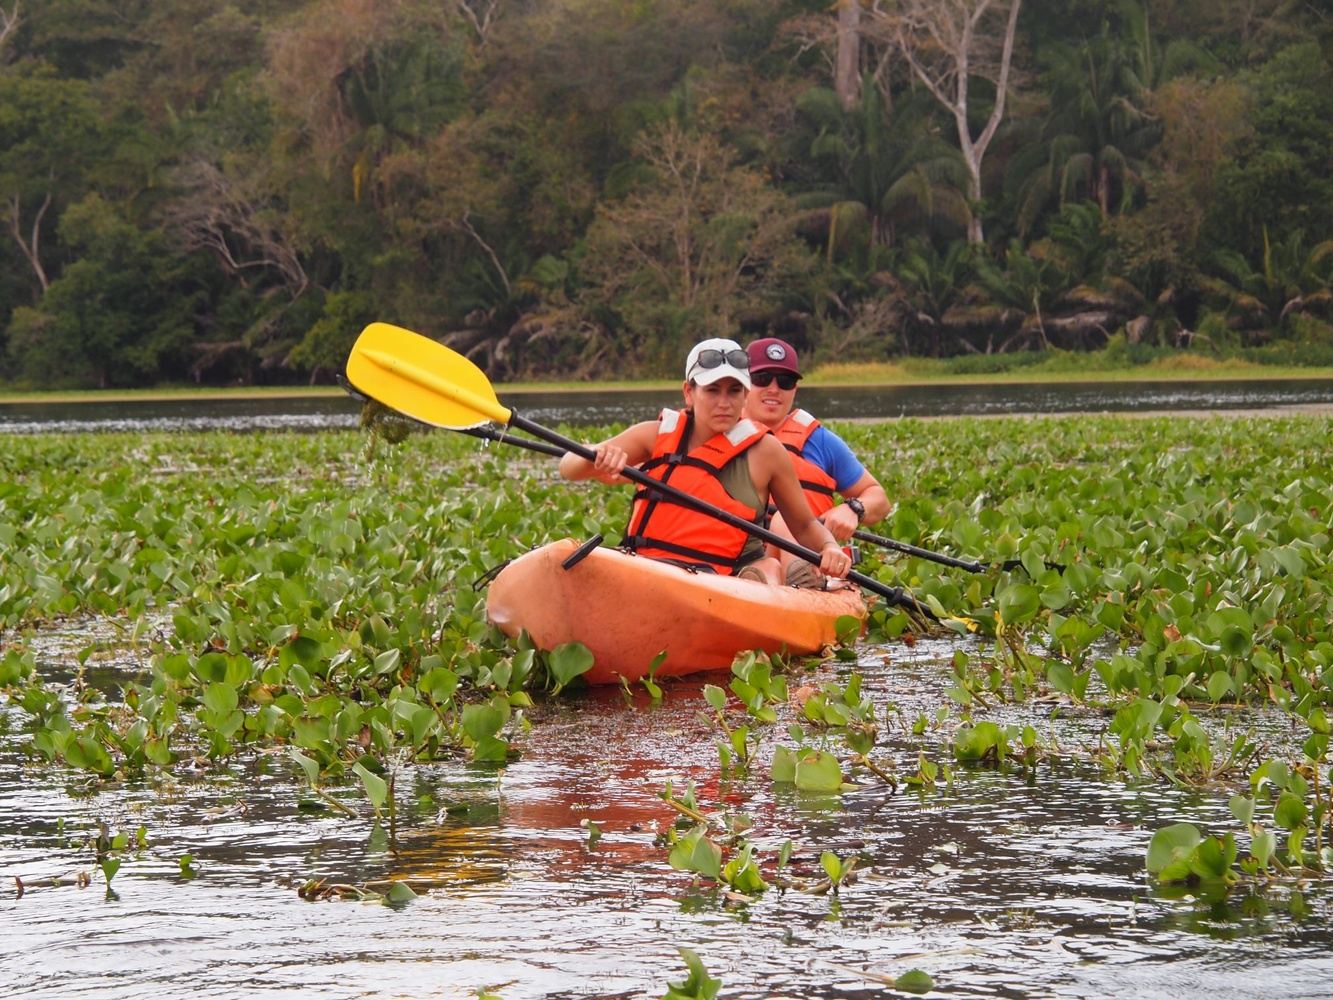 KAYAKING IN THE CHAGRES RIVER